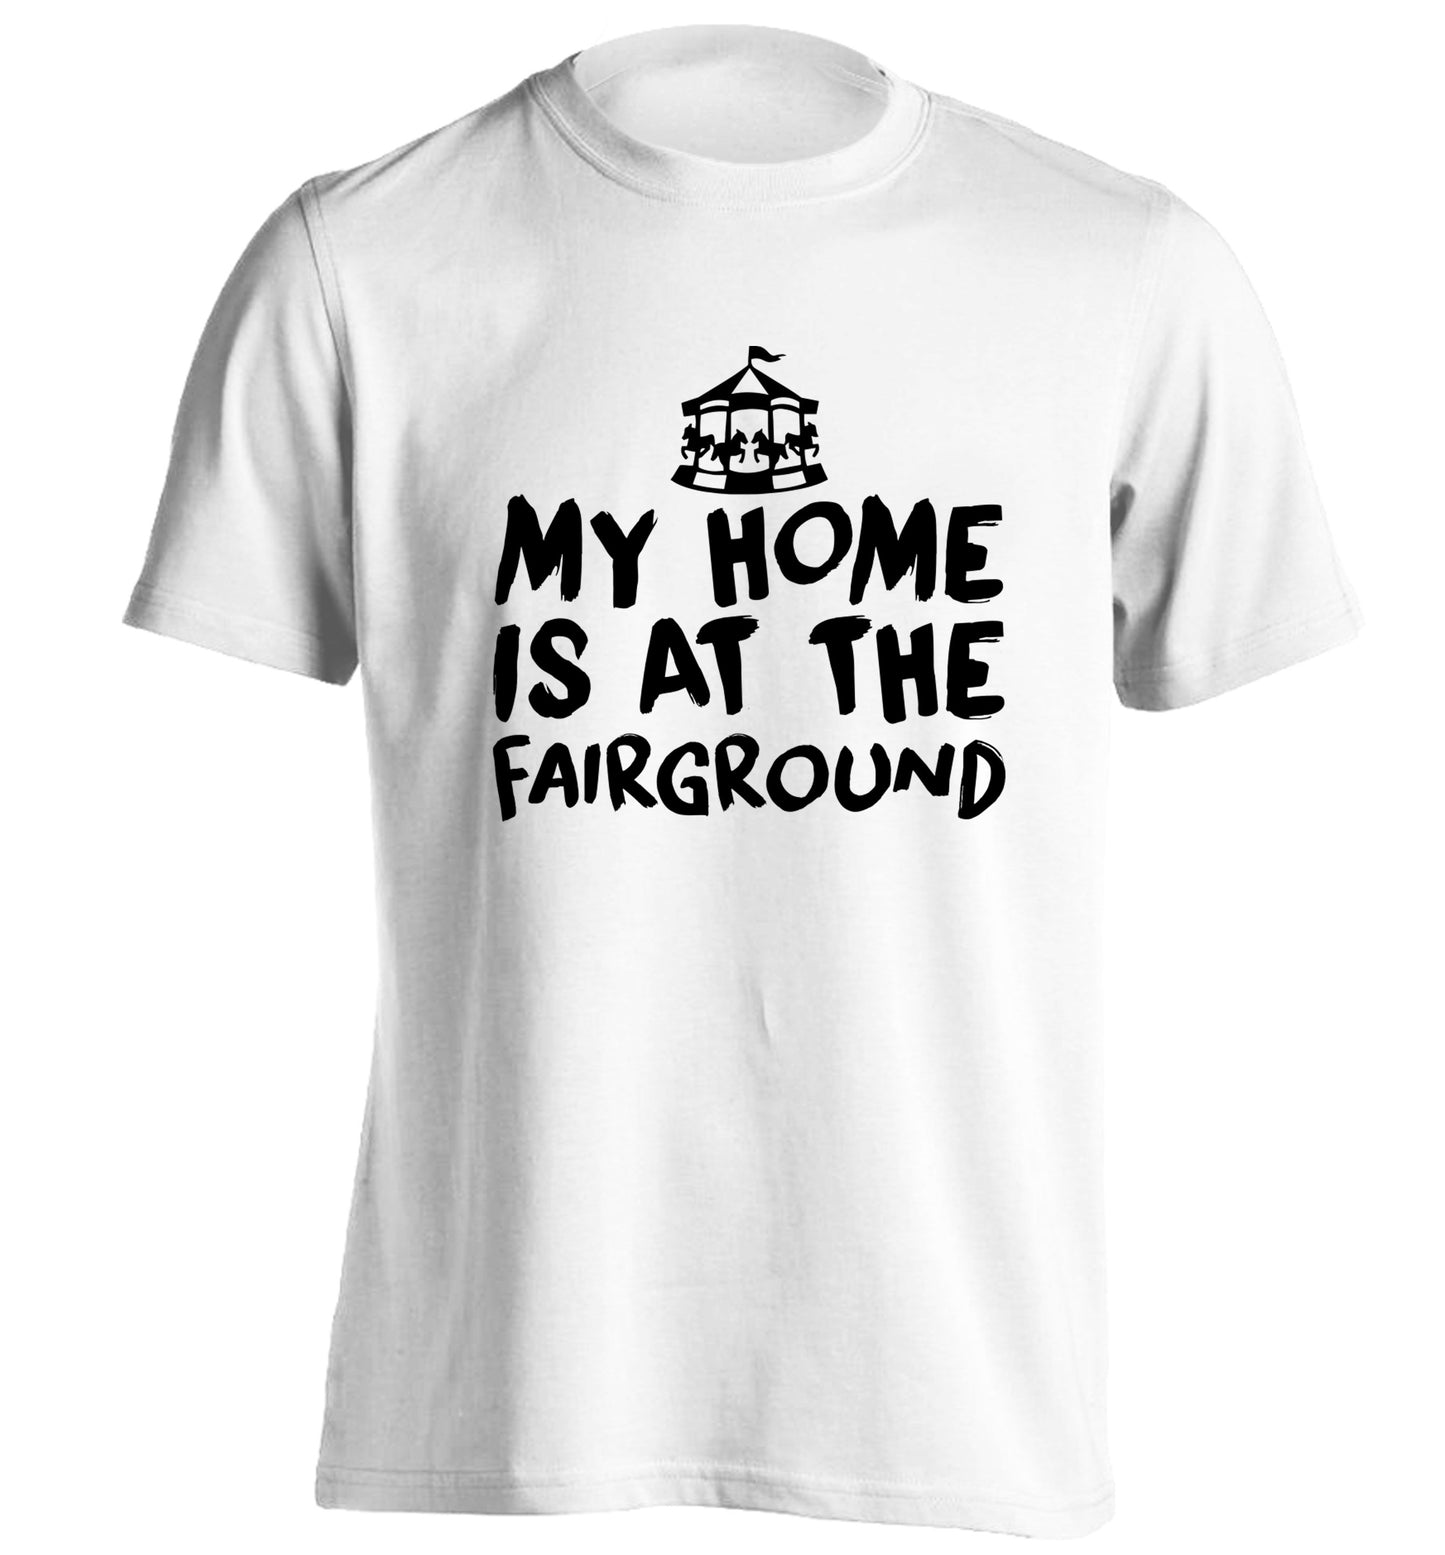 My home is at the fairground adults unisex white Tshirt 2XL